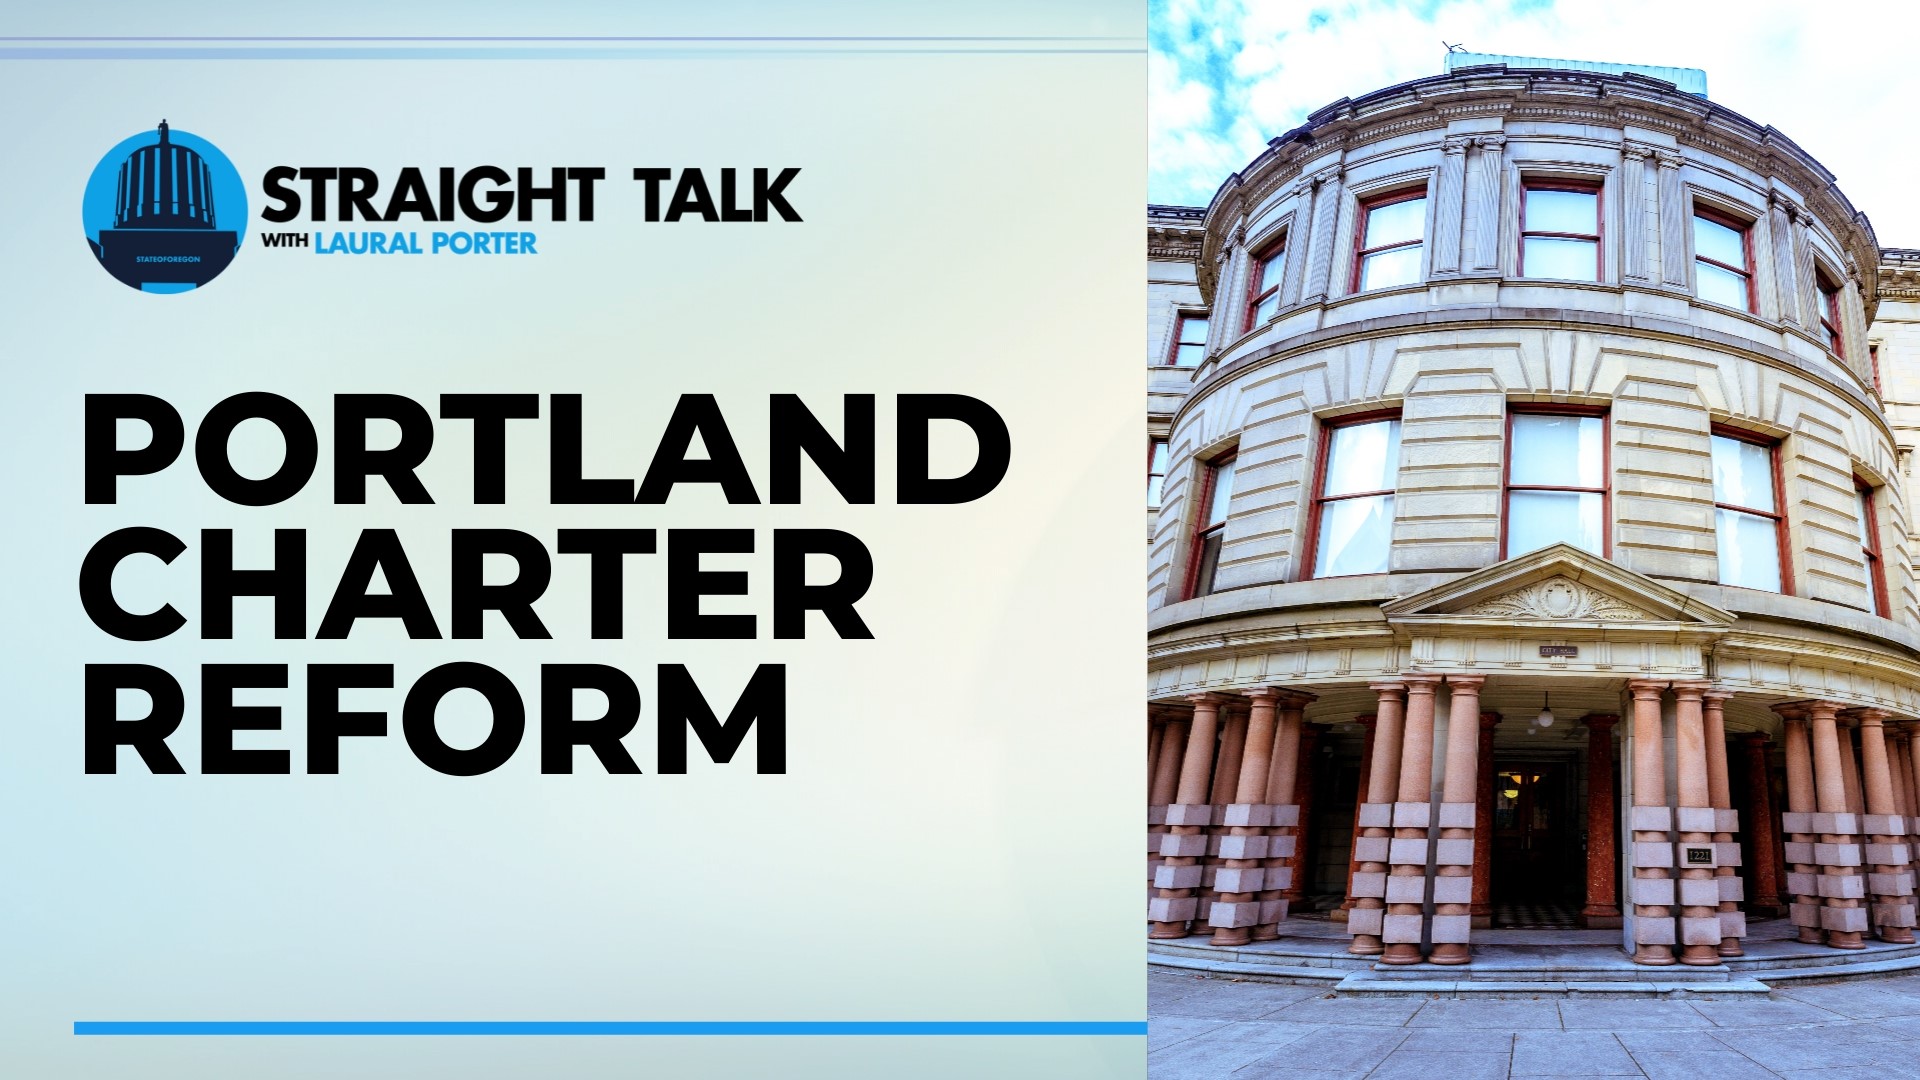 Supporters and an opponent joined Straight Talk to discuss the November ballot measure that could radically reshape Portland's city government.